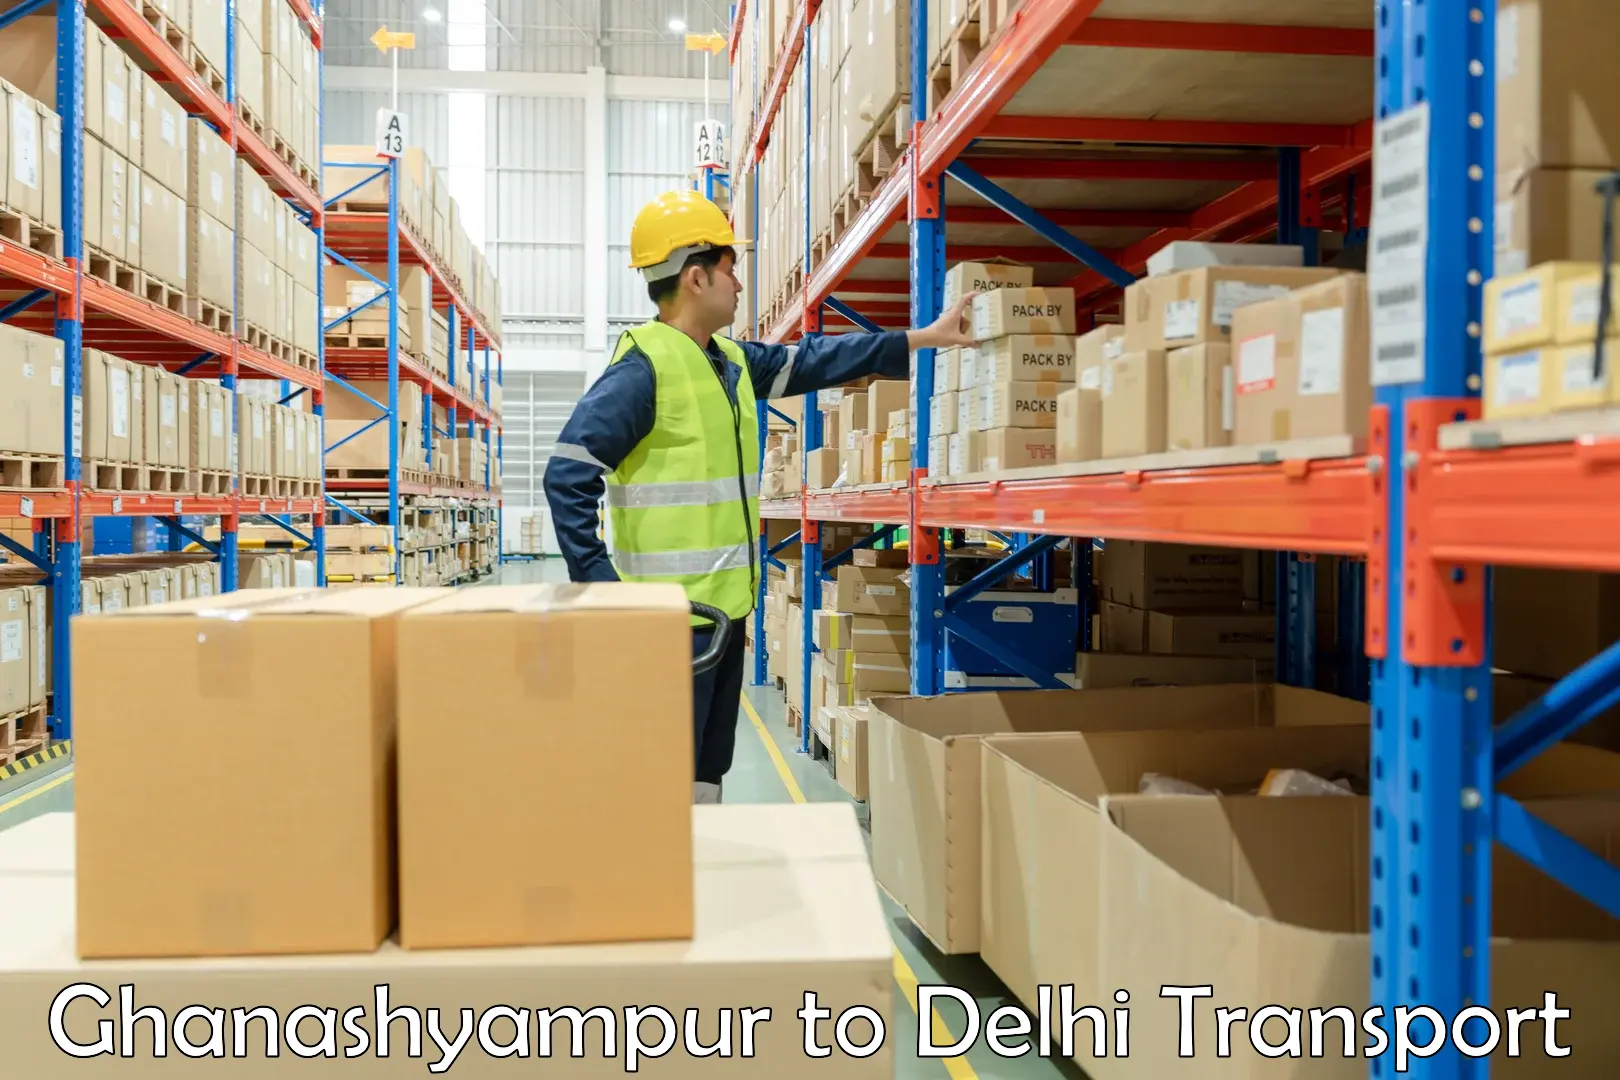 Truck transport companies in India Ghanashyampur to Lodhi Road